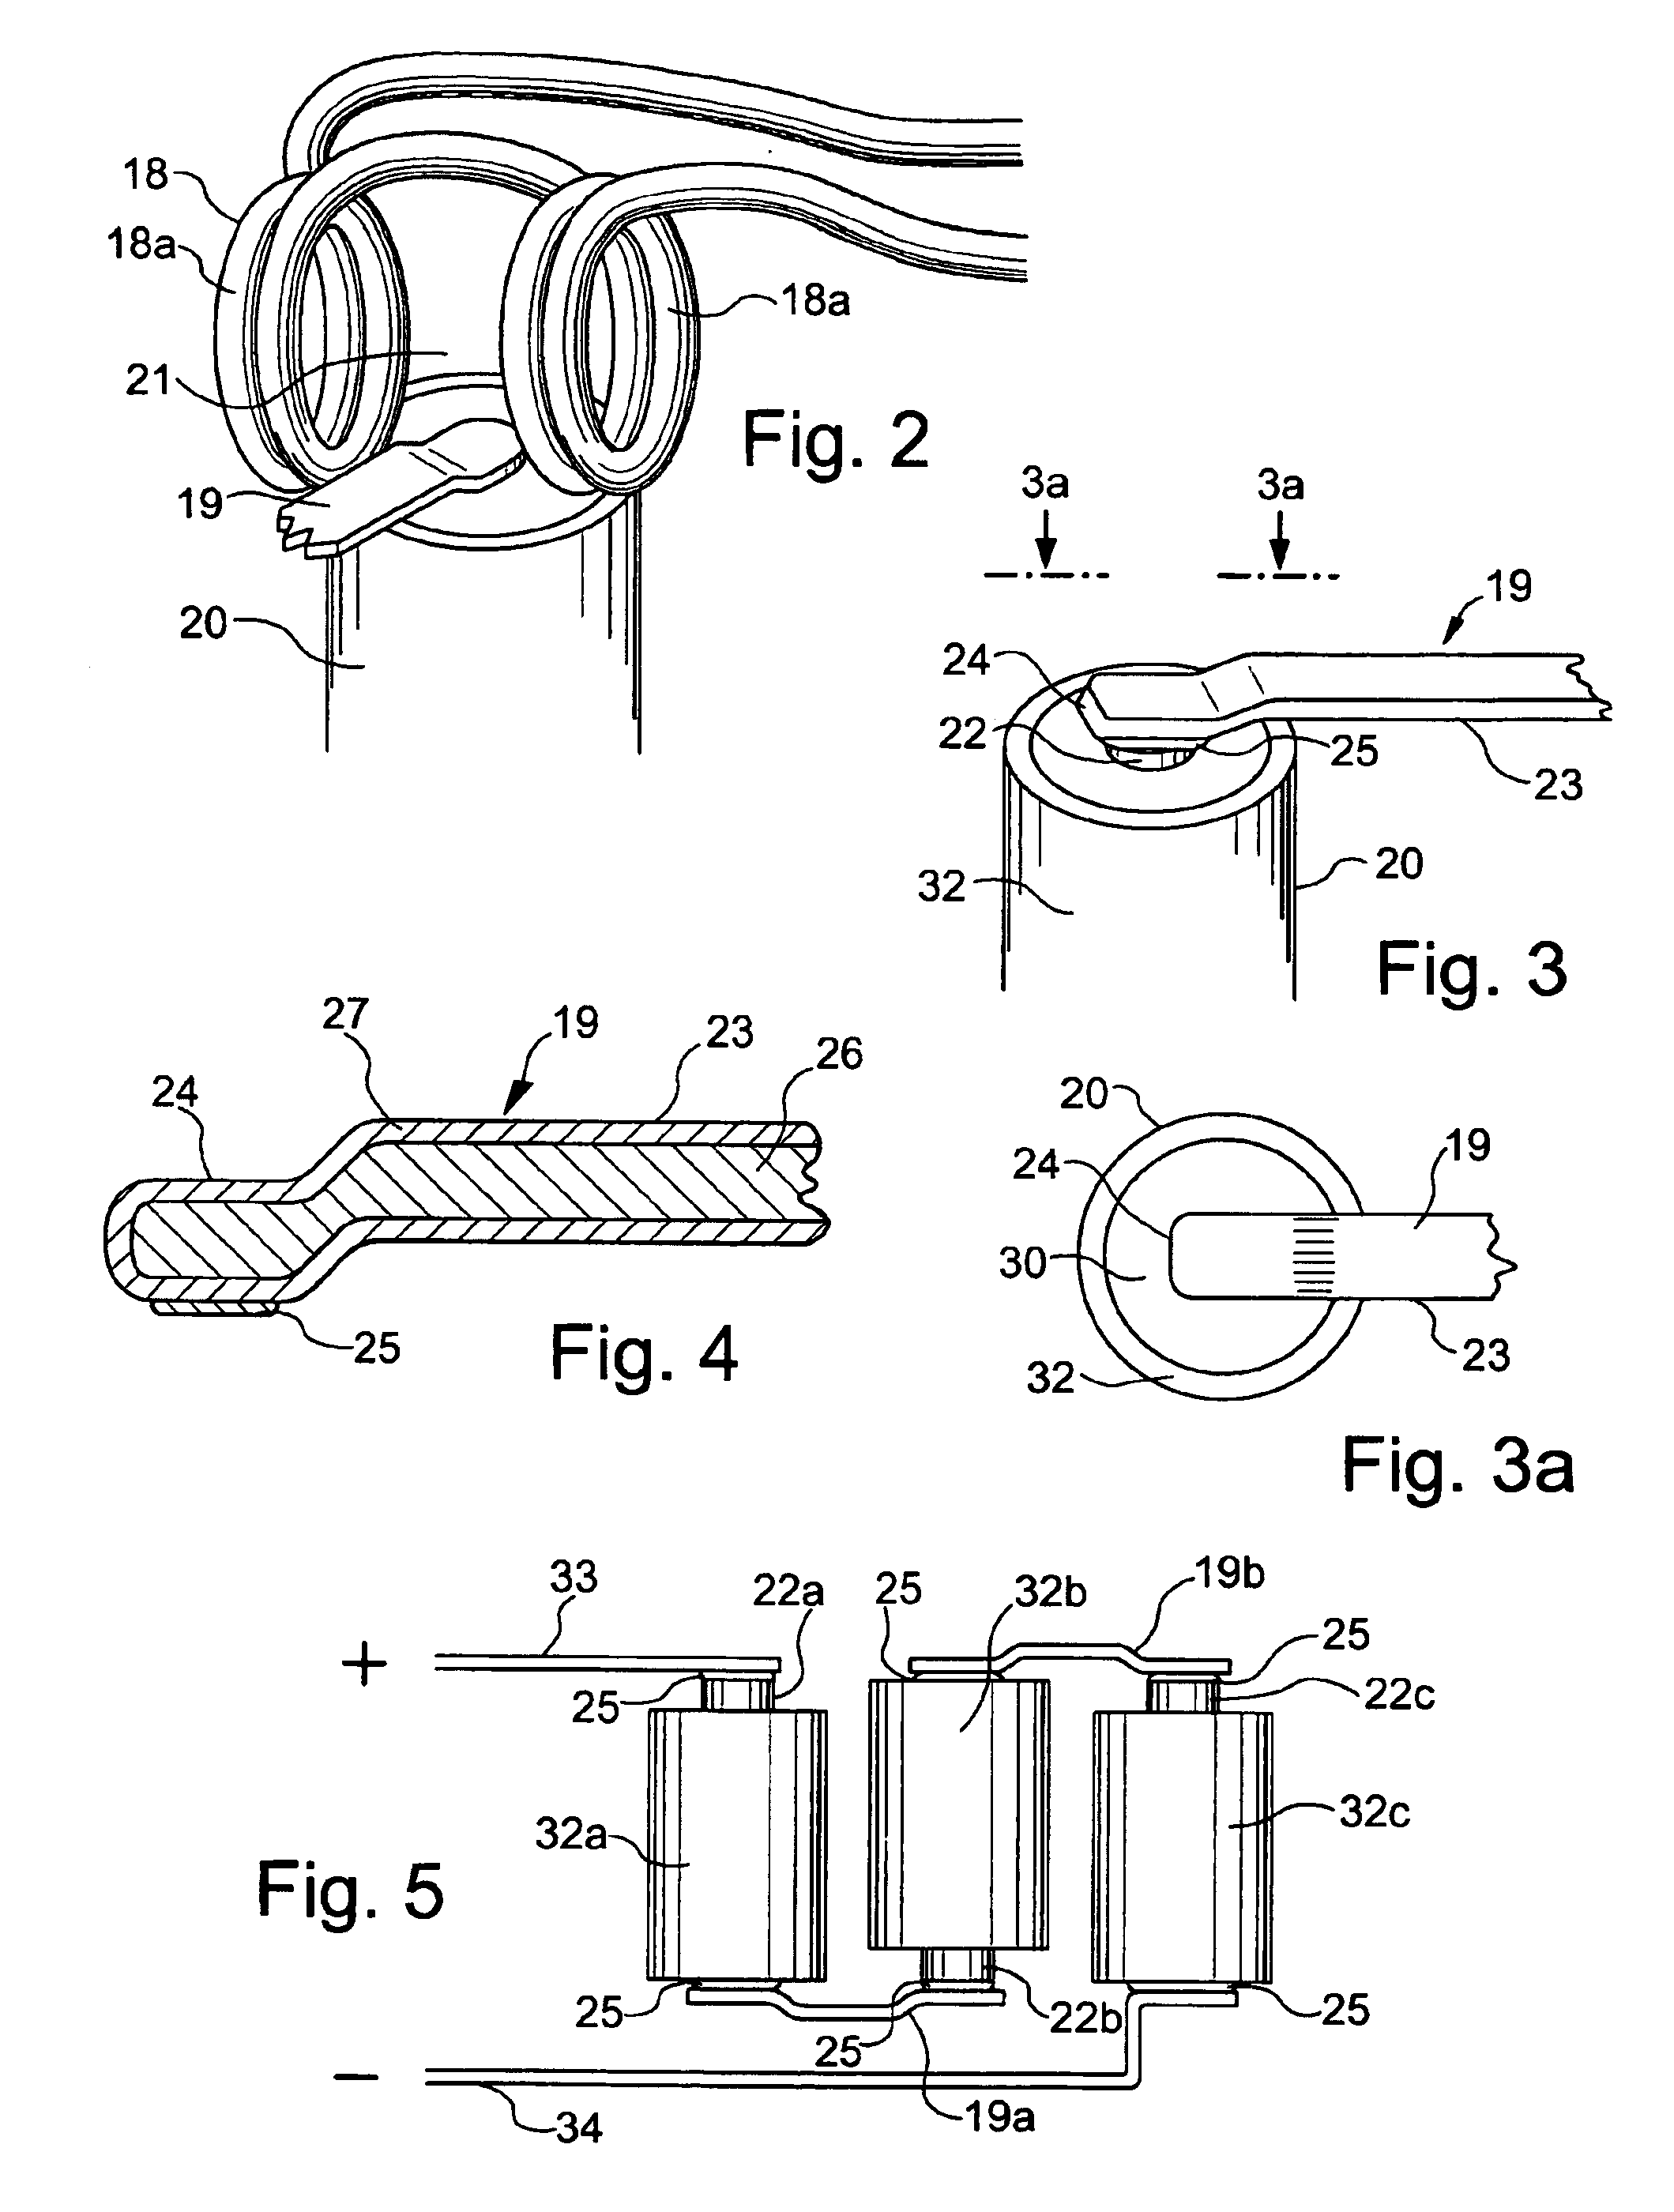 Apparatus and method for fabricating dry cells into batteries using R F induction heating